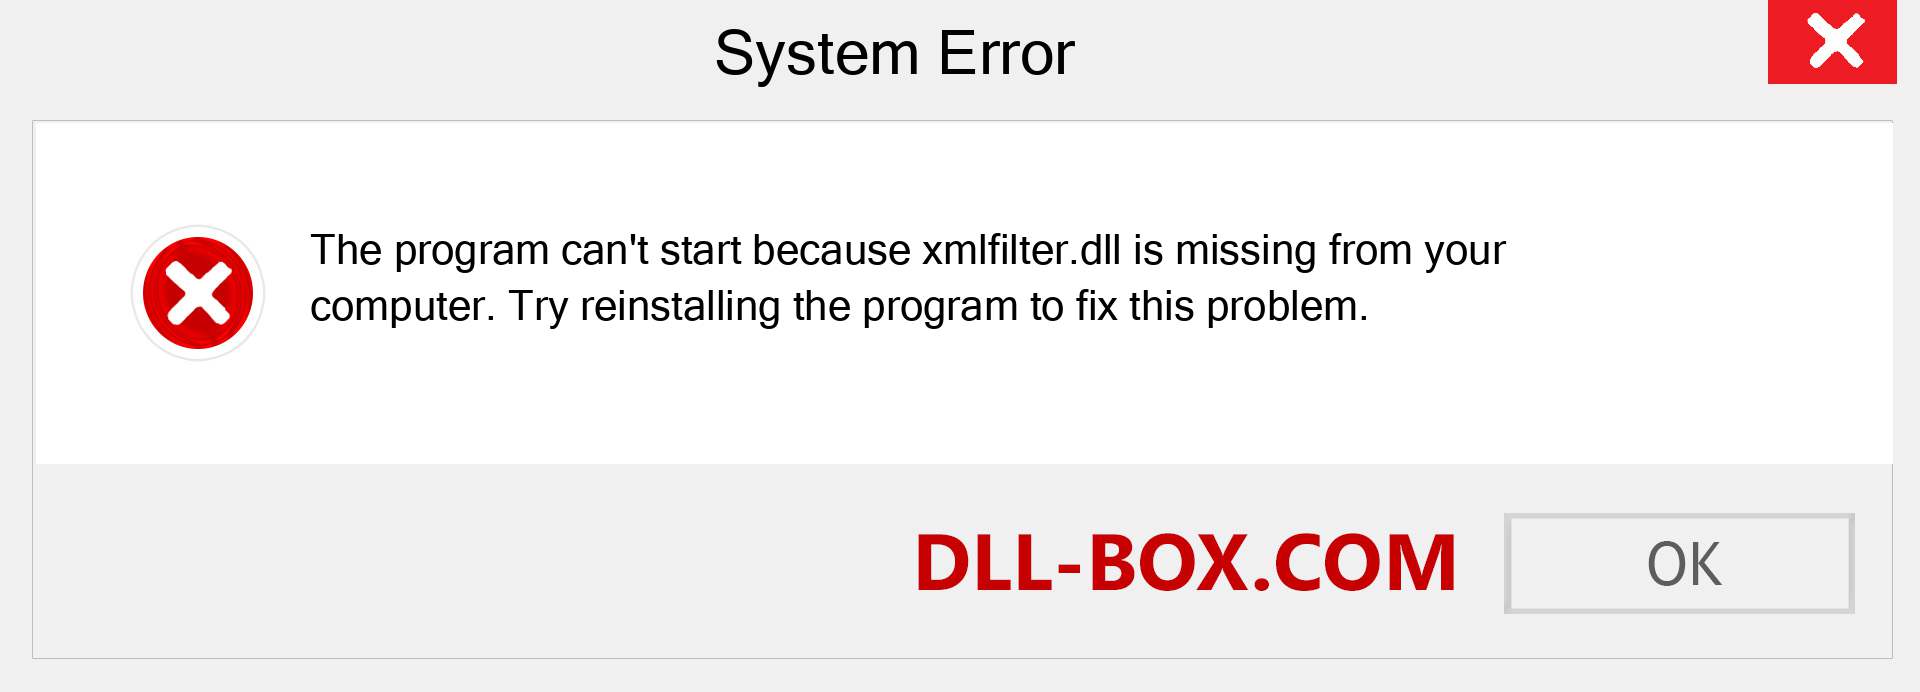  xmlfilter.dll file is missing?. Download for Windows 7, 8, 10 - Fix  xmlfilter dll Missing Error on Windows, photos, images